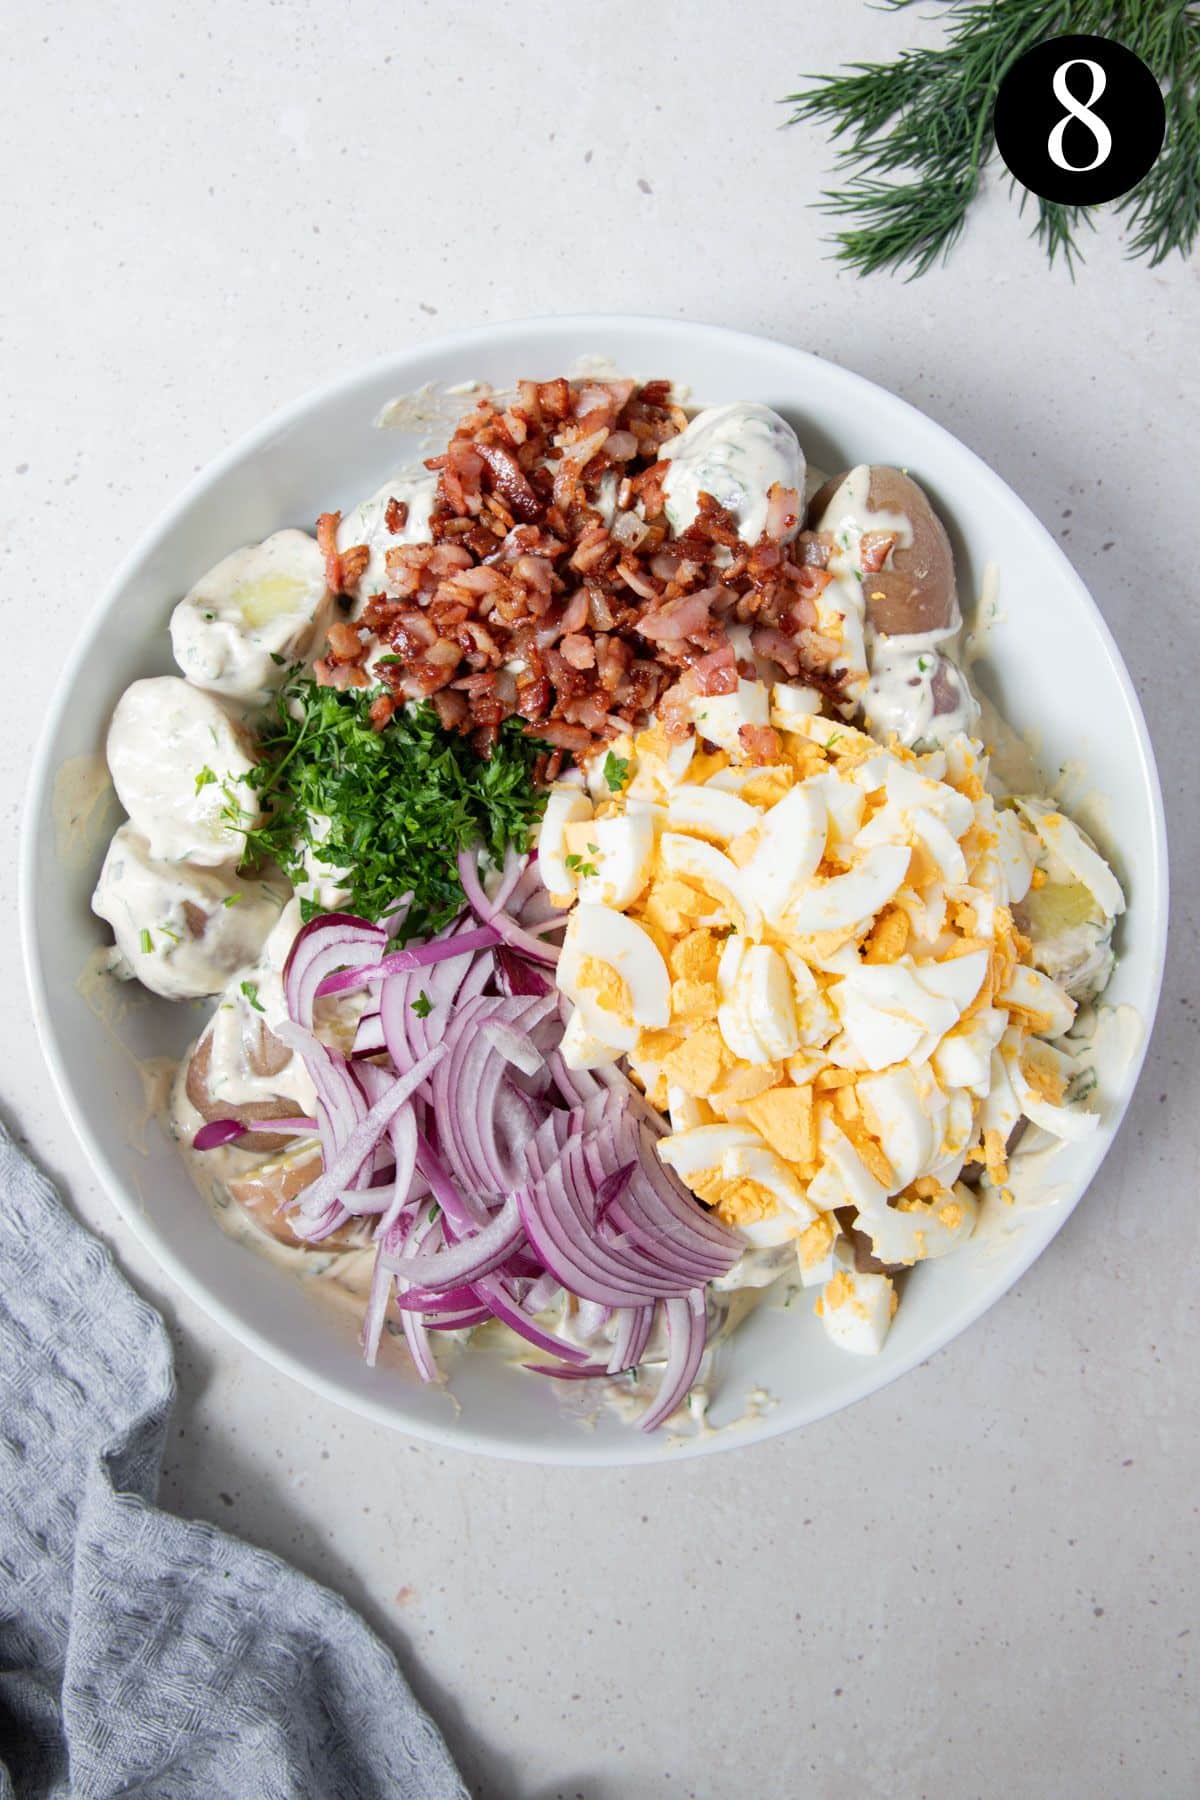 potato salad ingredients together in a bowl.